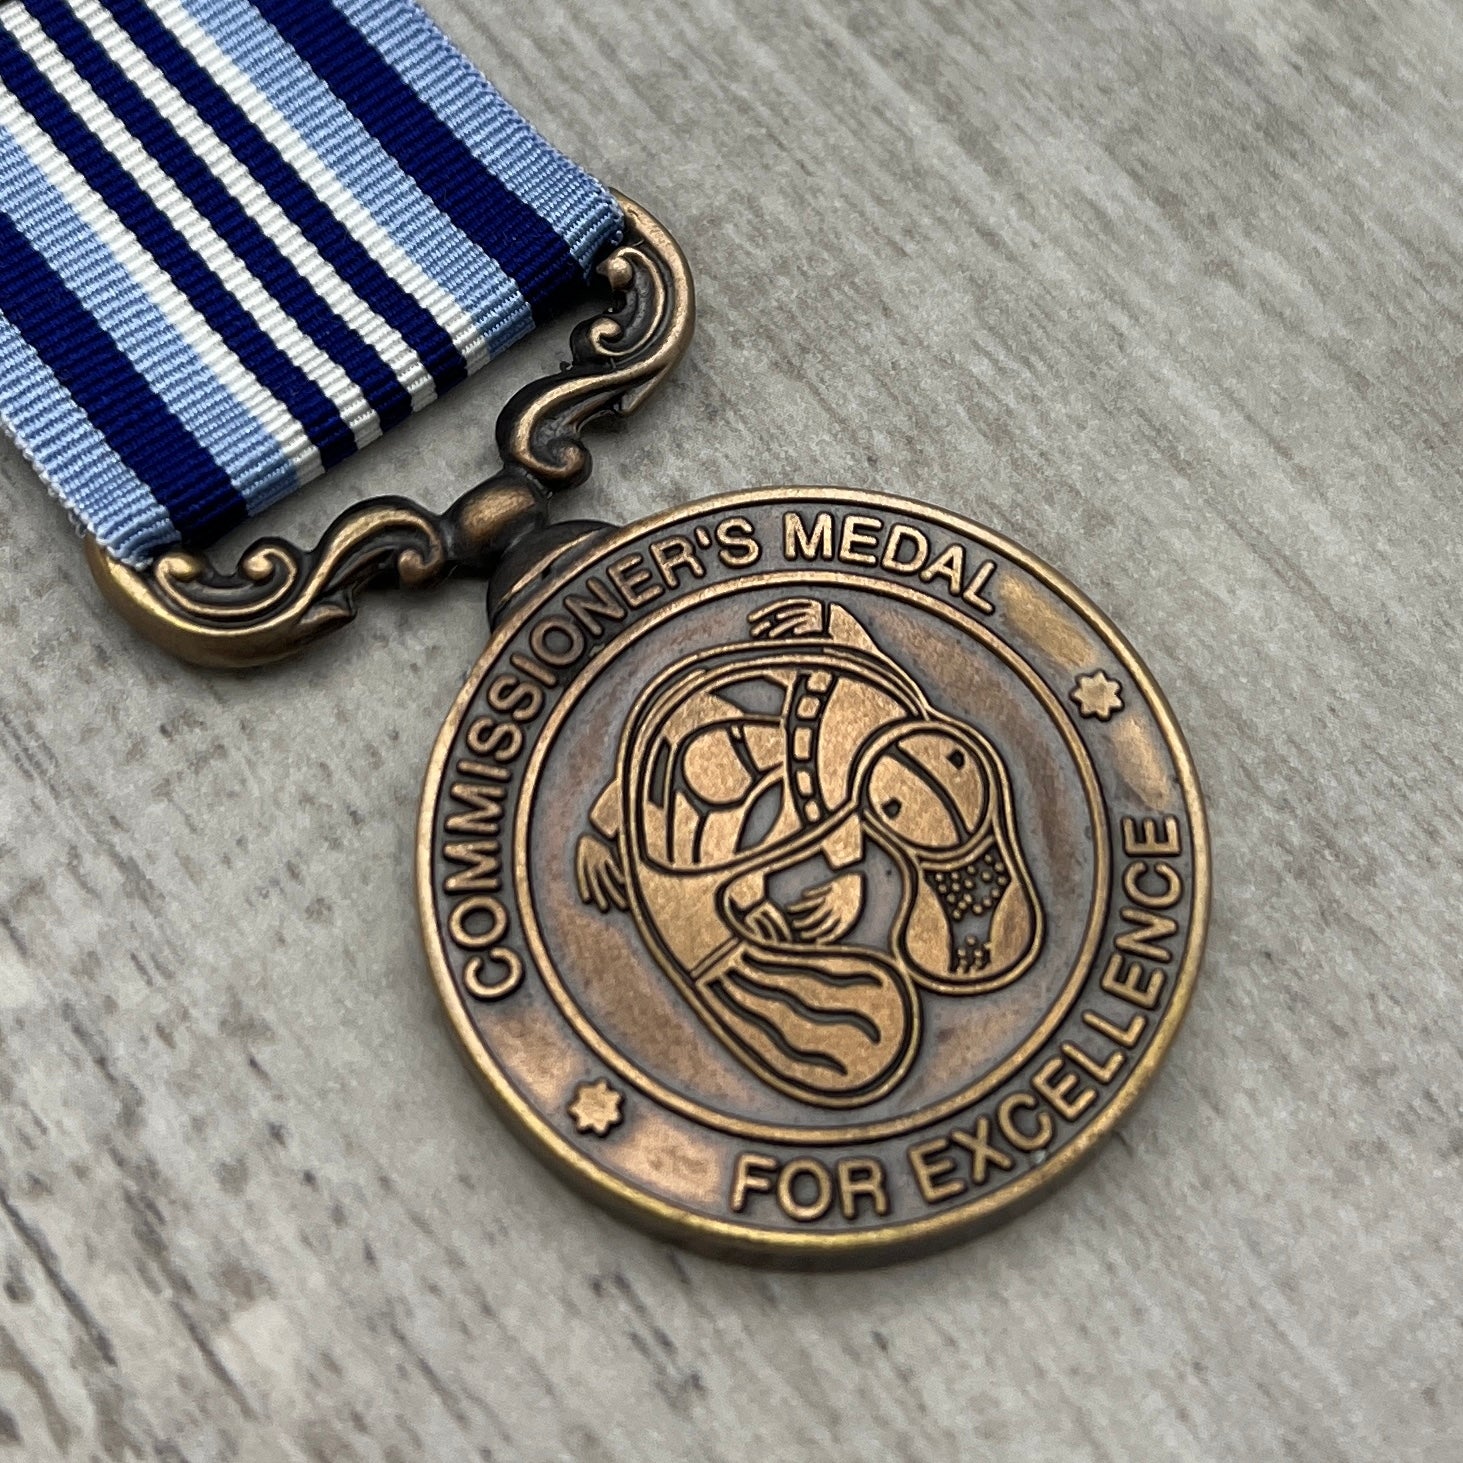 Australian Federal Police - Commissioner's Medal For Excellence - Foxhole Medals